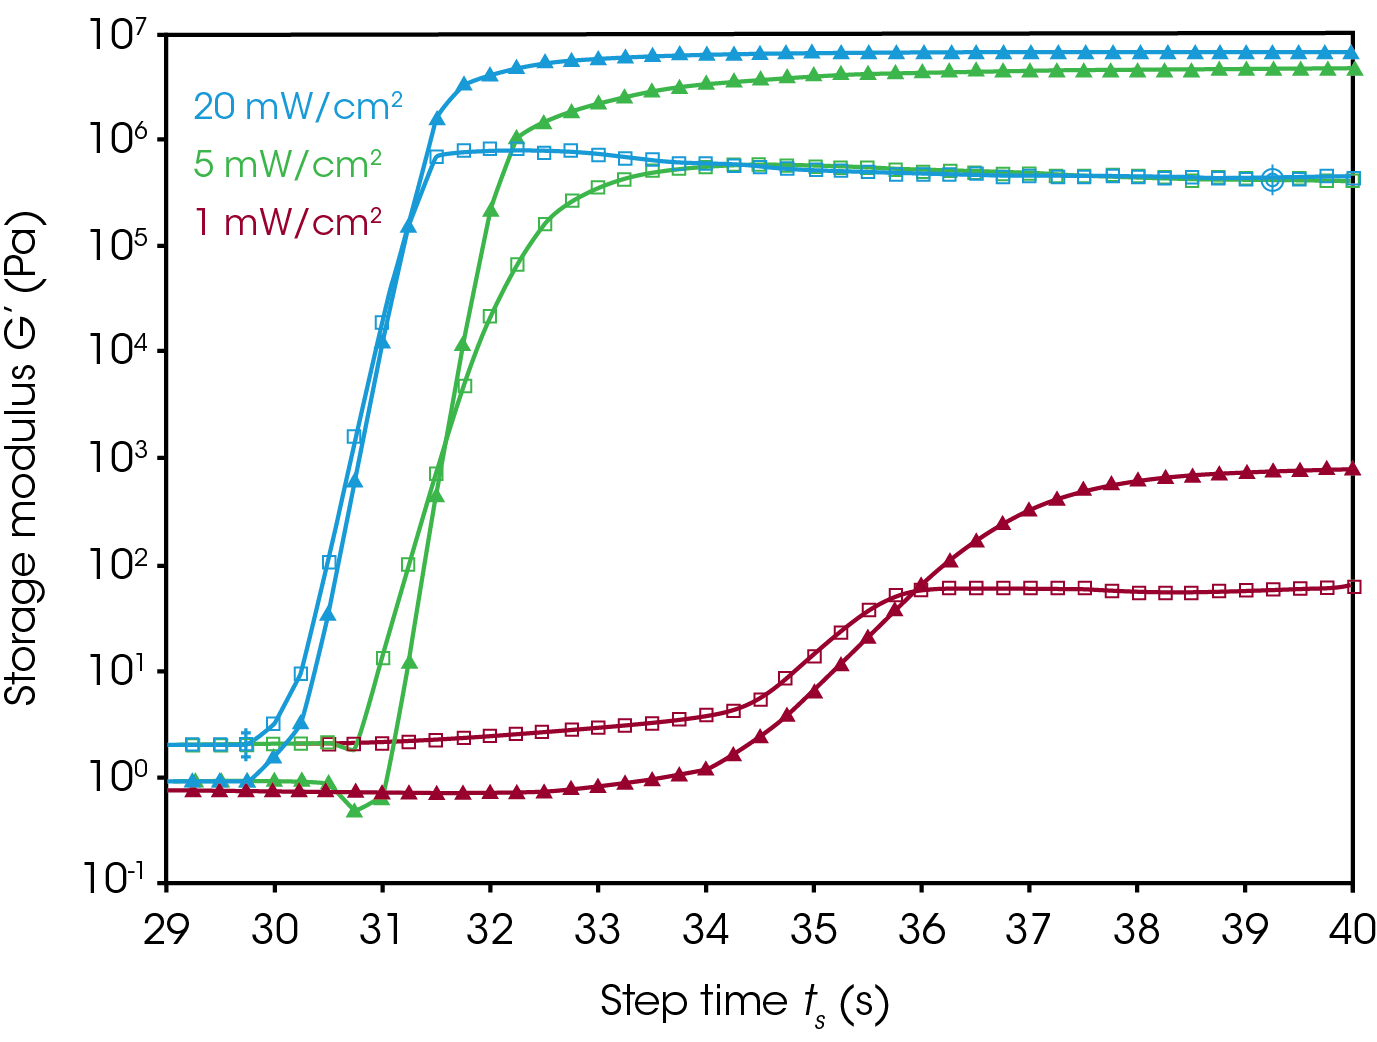 Figure 6. Oscillatory time sweep experiment (fast sampling mode). Storage and loss modulus are plotted as a function of time for a resin cured at different light intensities for a duration of 5 seconds, the oscillation frequency used was 2 rad/s. The blue curves are storage and loss modulus during an exposure intensity of 20 mW/cm2, the green is for 5 mW/cm2, and the purple for 1 mW/cm2. Differences in the extent of cure can be observed by the difference in the storage modulus magnitude at the end of the curing cycle.